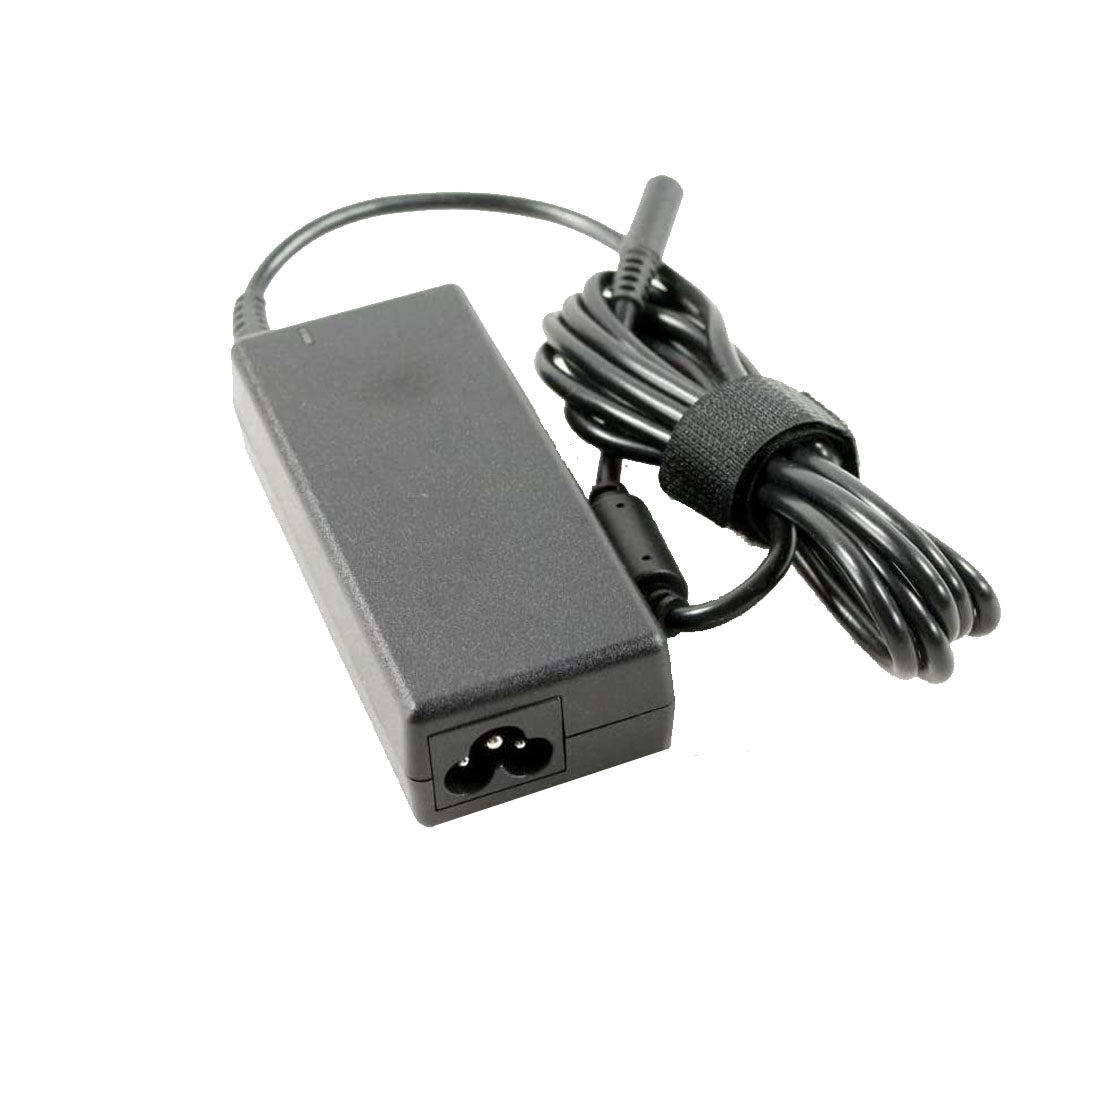 Dell Original 65W 19.5V 4.5mm Pin Laptop Charger Adapter for Vostro 5471 With Power Cord